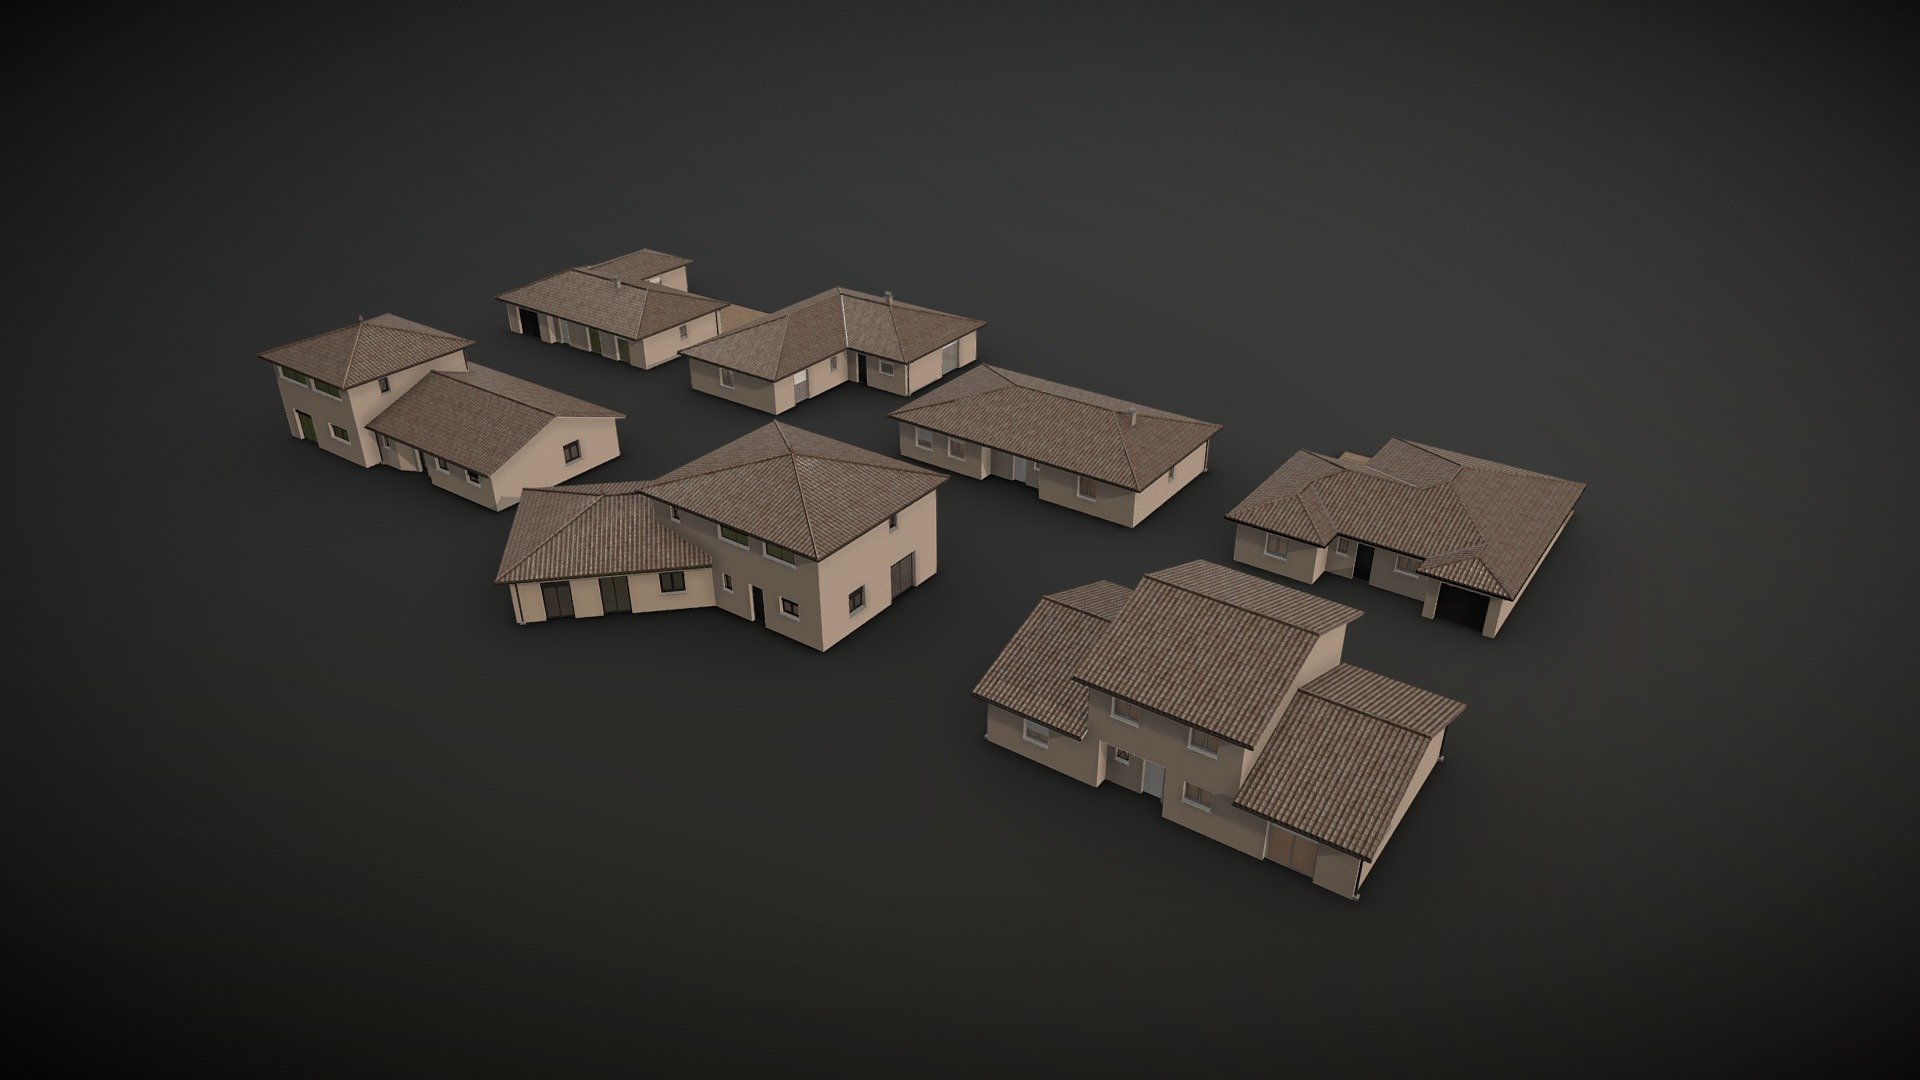 7 models of houses from the South of France that can match a European and Californian style. Ideal to quickly create a subdivision with variations
Low poly type originally created for the game Cities:Skylines 3d model